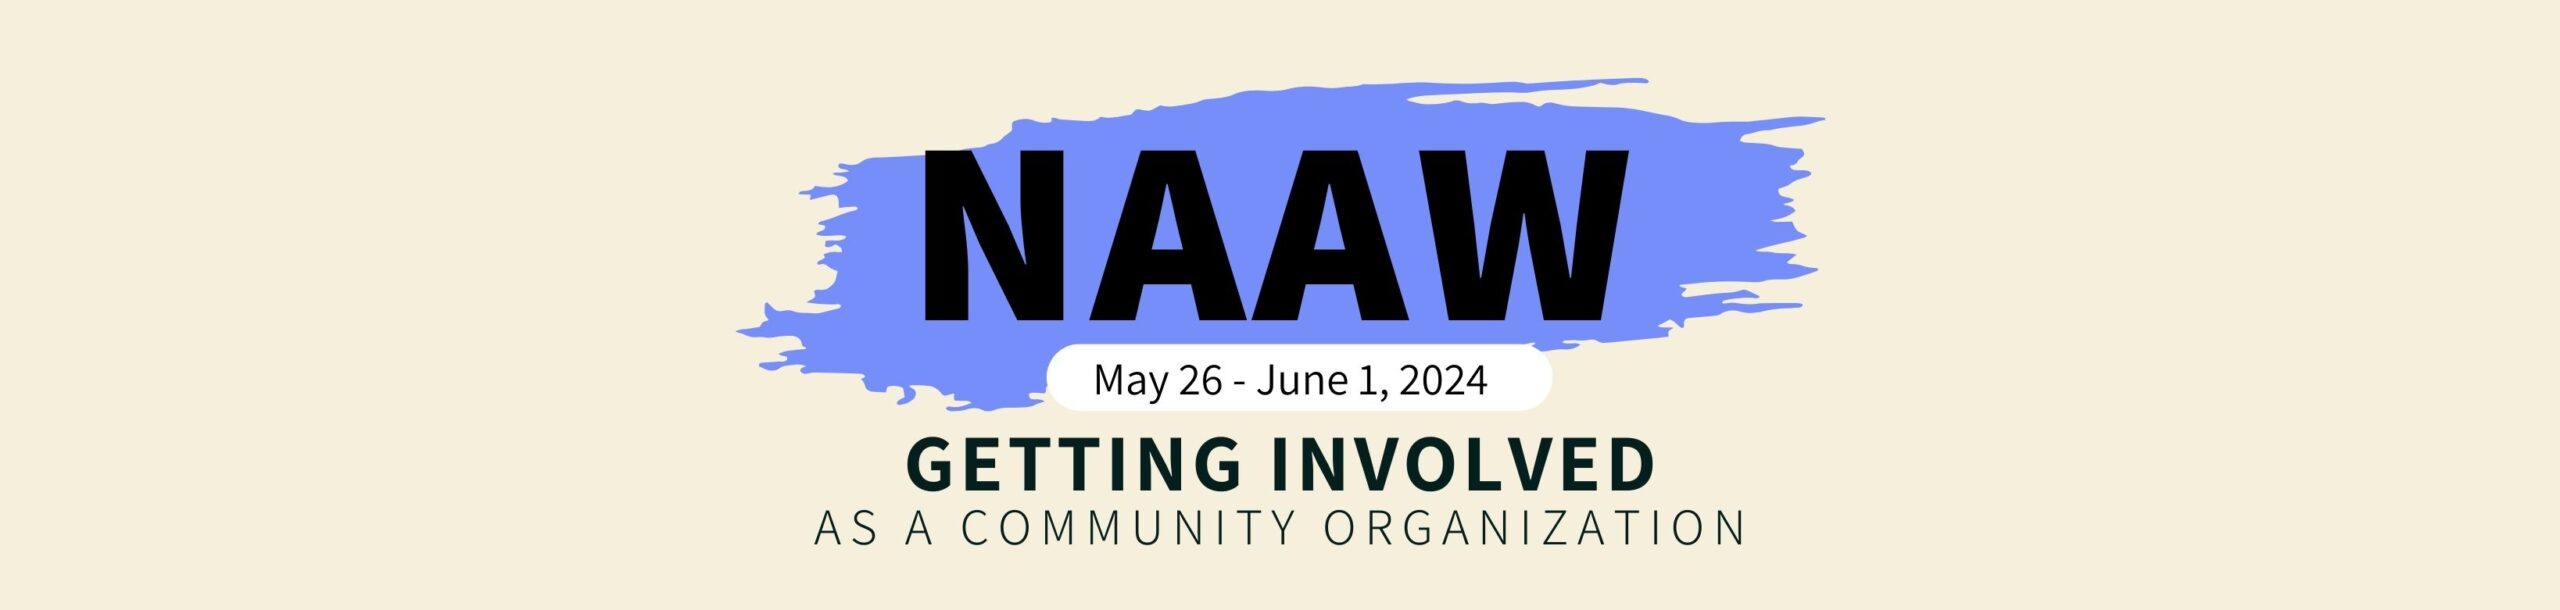 NAAW – Getting Involved as a Community Organization